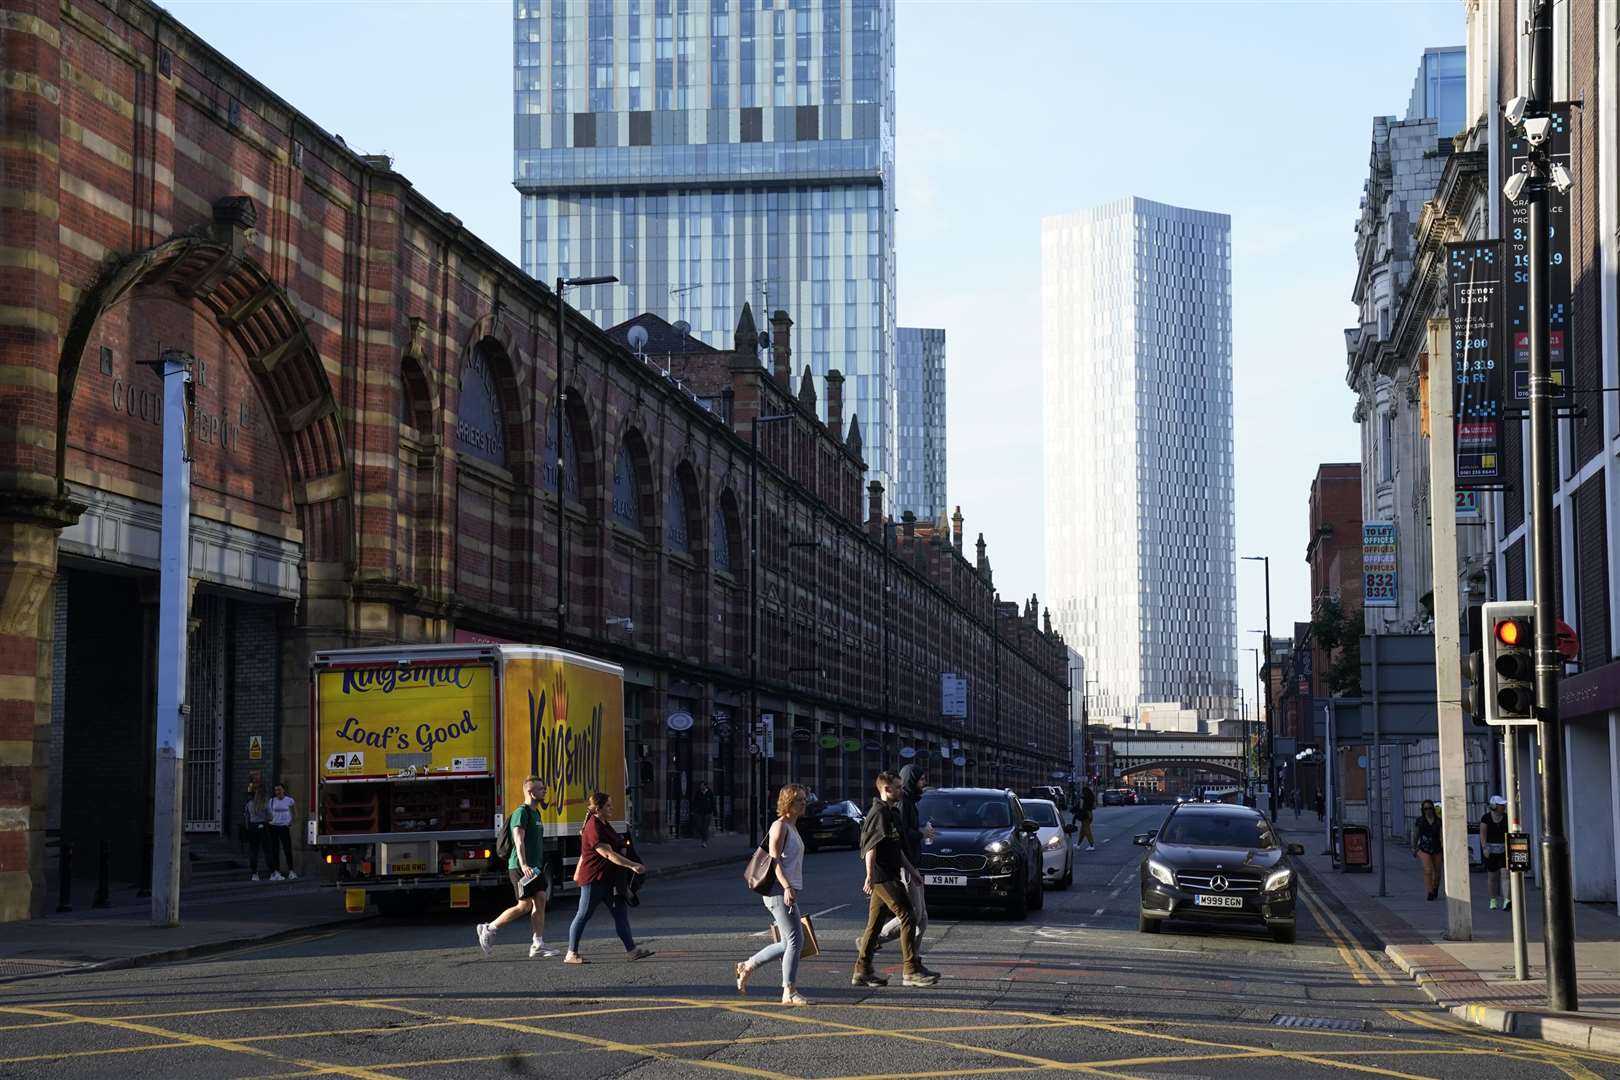 Rightmove found the average monthly asking rent in Deansgate in Manchester this year so far is £3,766 (Danny Lawson/PA)